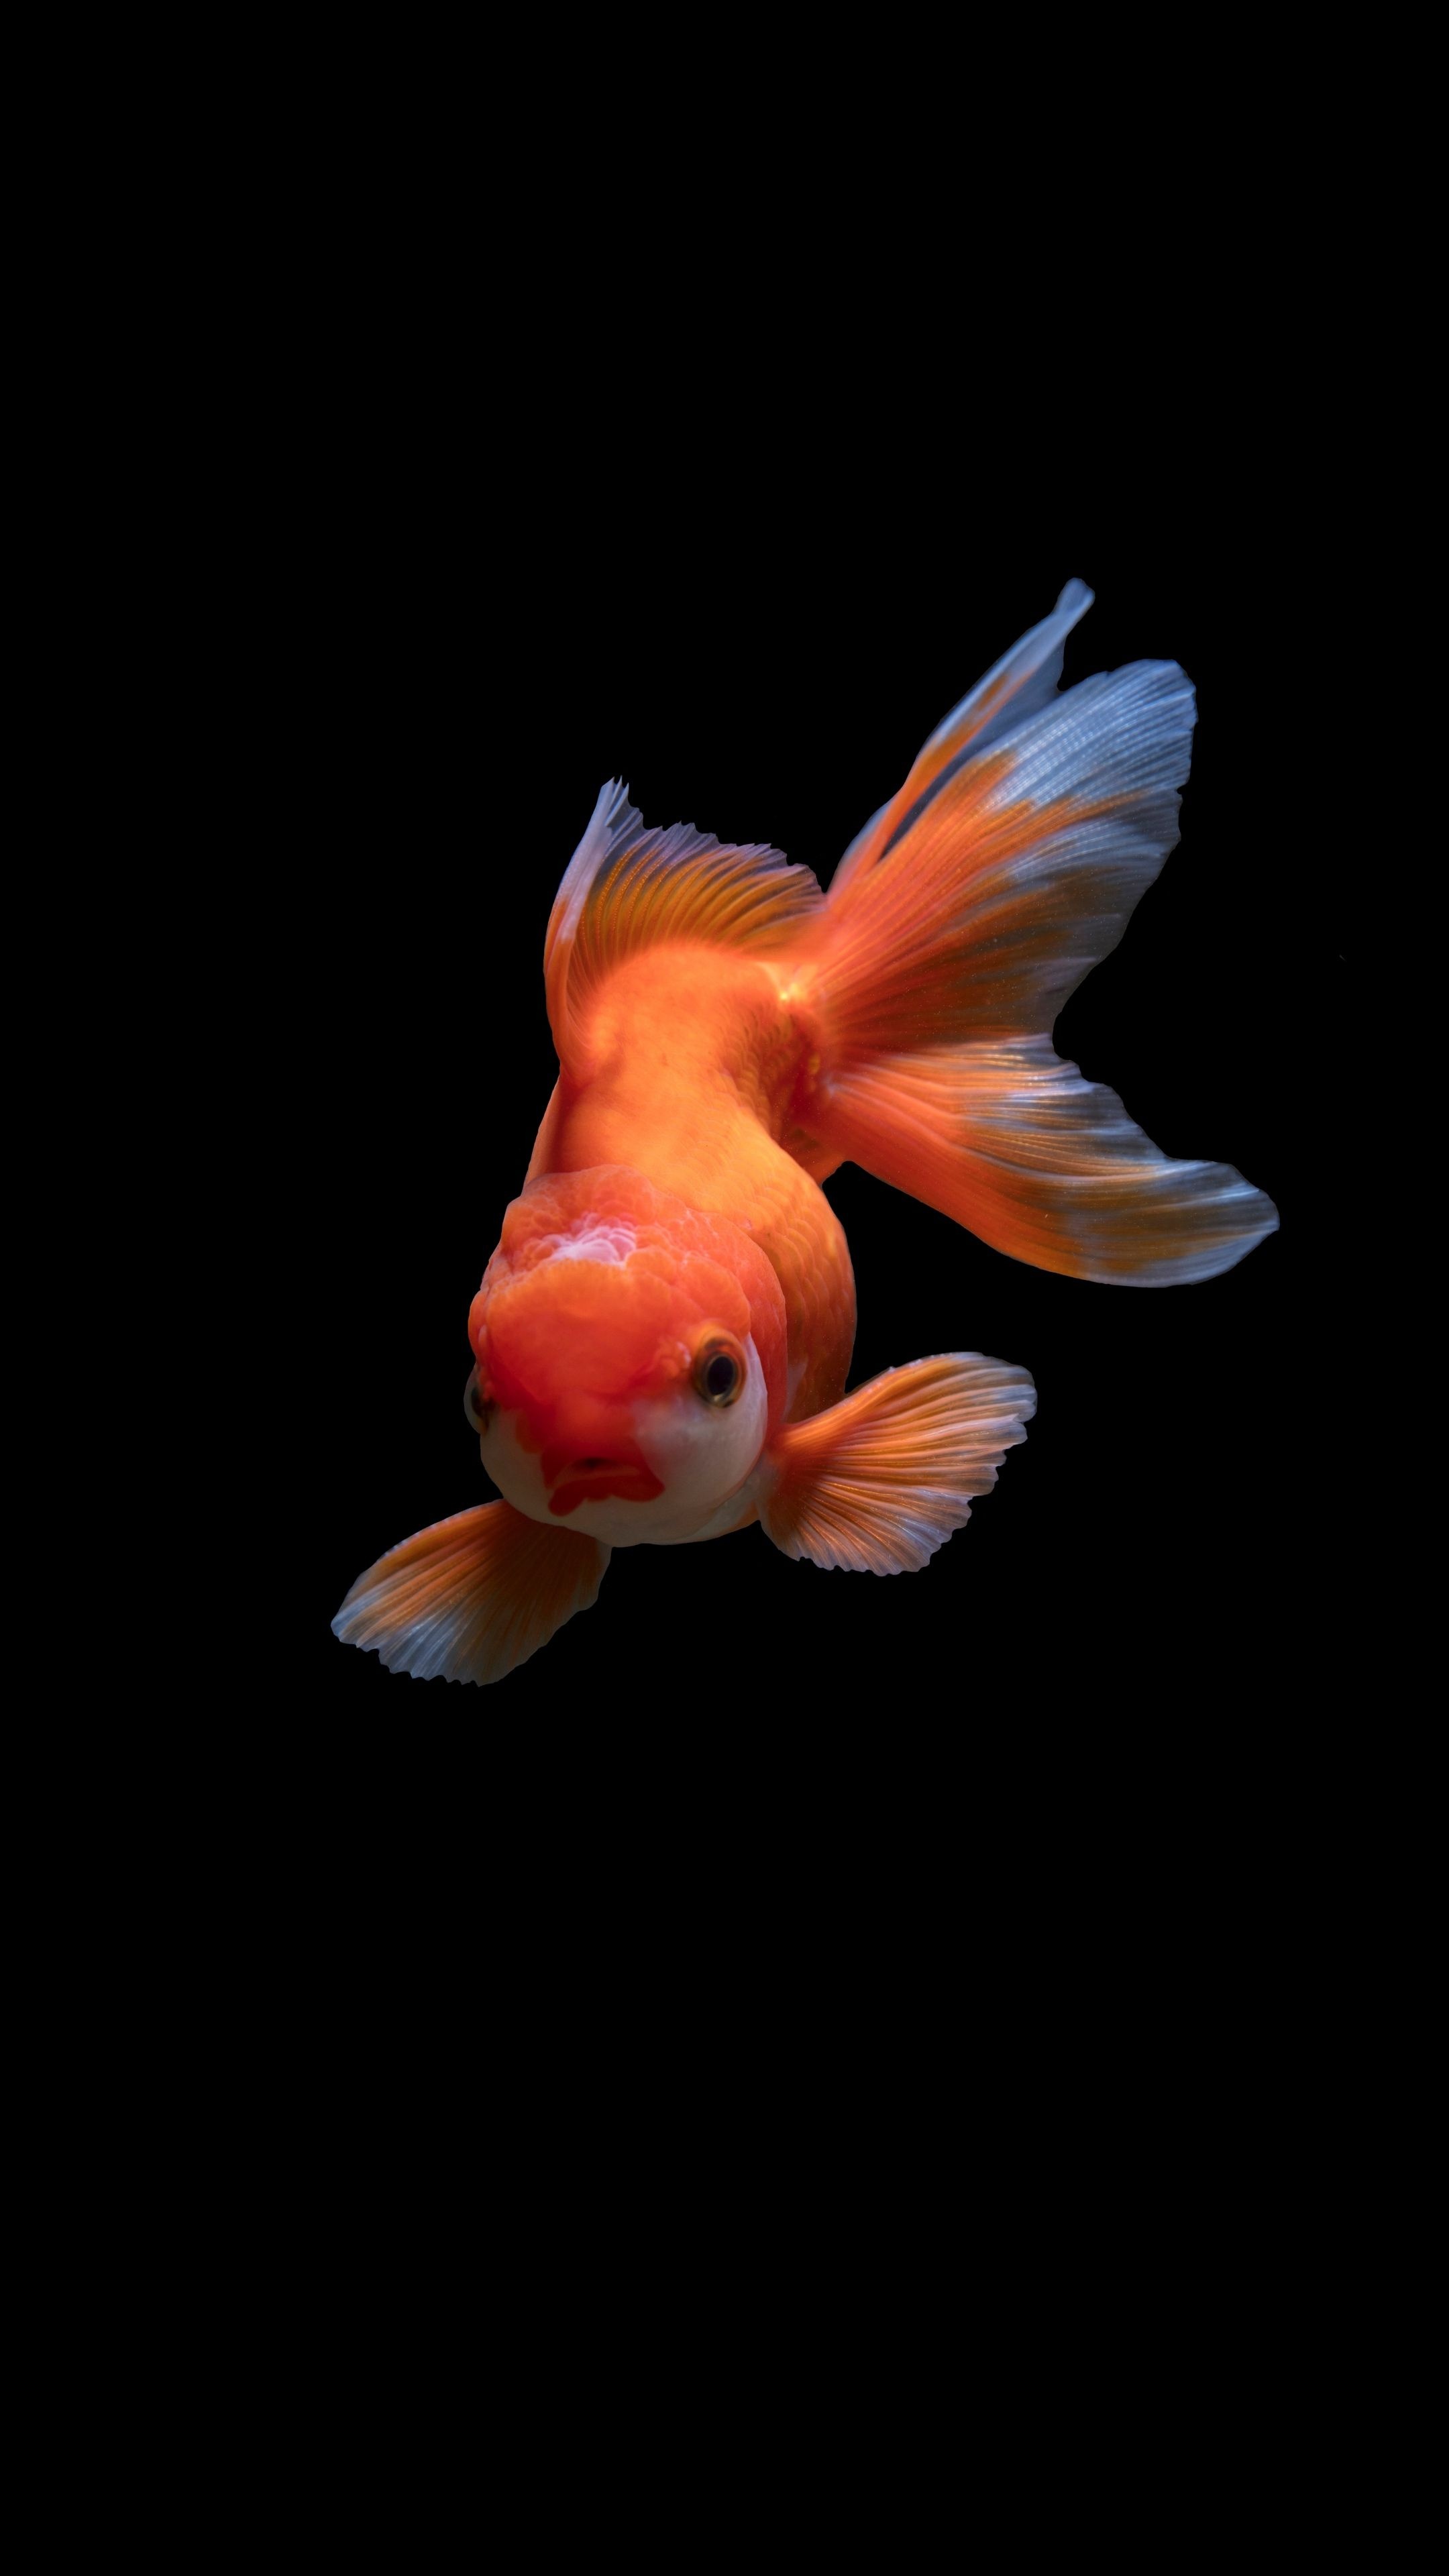 Goldfish: Released into the wild have become an invasive pest in parts of North America. 2160x3840 4K Wallpaper.